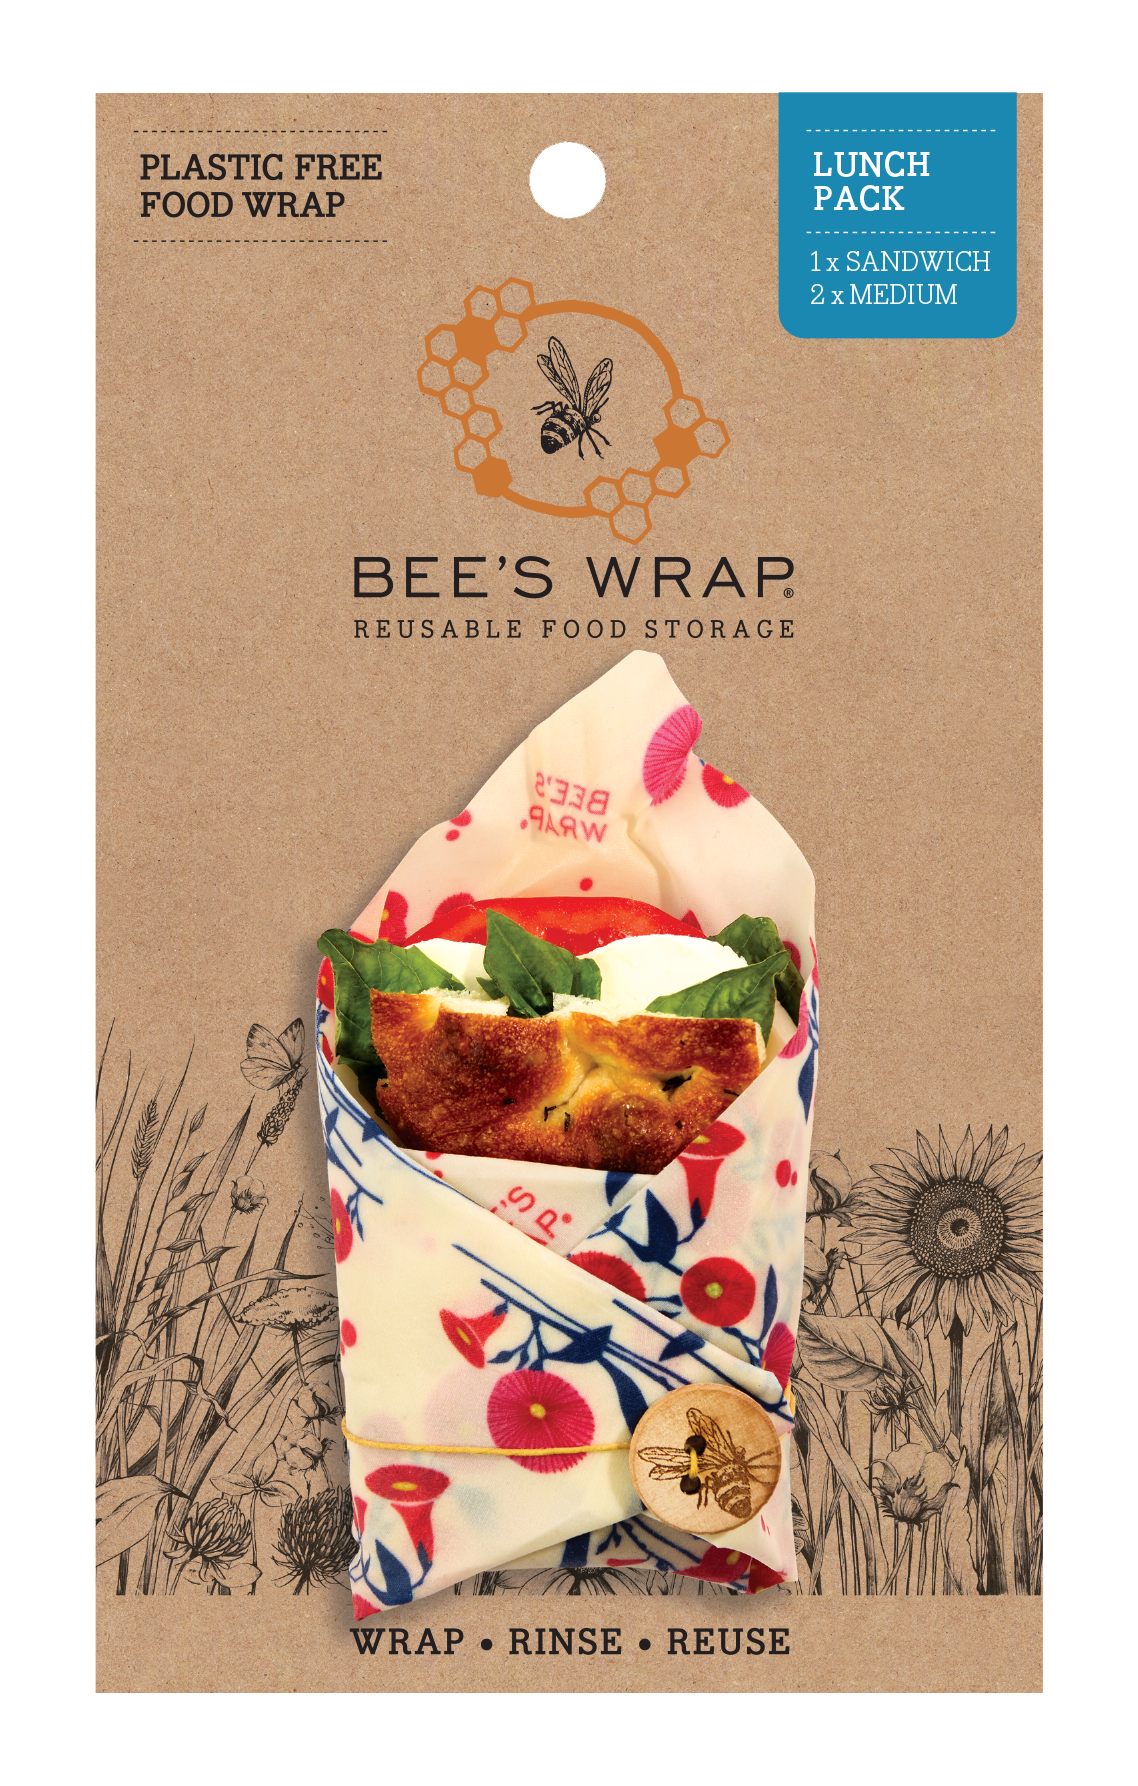 Closiist's Bees Wrap Plant-Based Roll in Meadow Magic Print is a sustainable and eco-friendly way to keep your food fresh. It is made with all-natural ingredients and is reusable, so you can reduce your plastic waste. Order yours today!